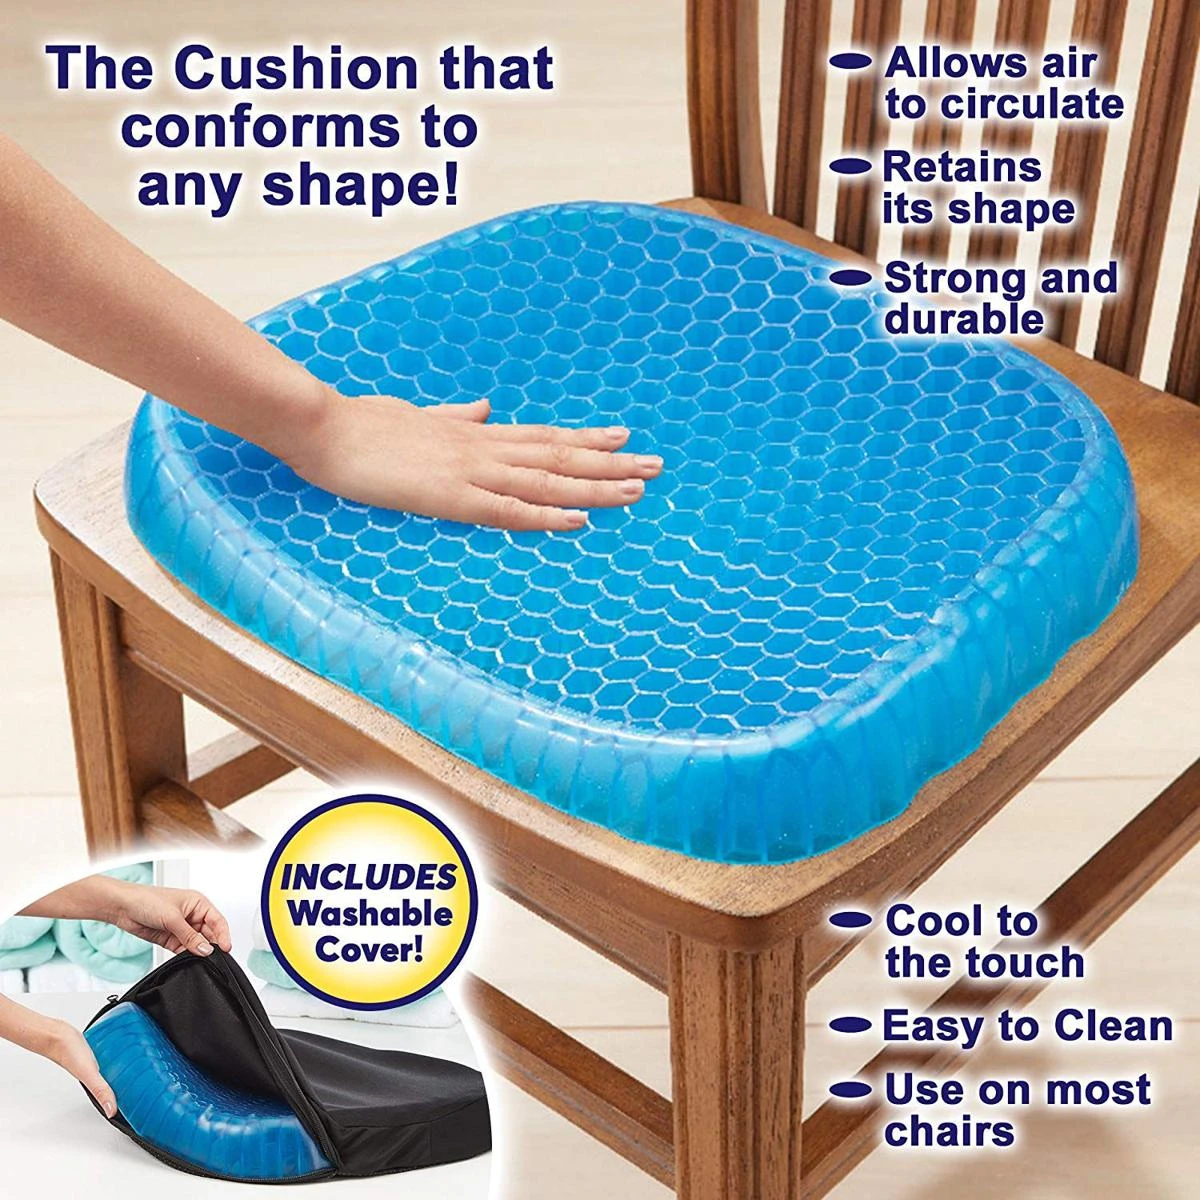 Egg Sitter Seat Cushion with Non-Slip Cover - Blue